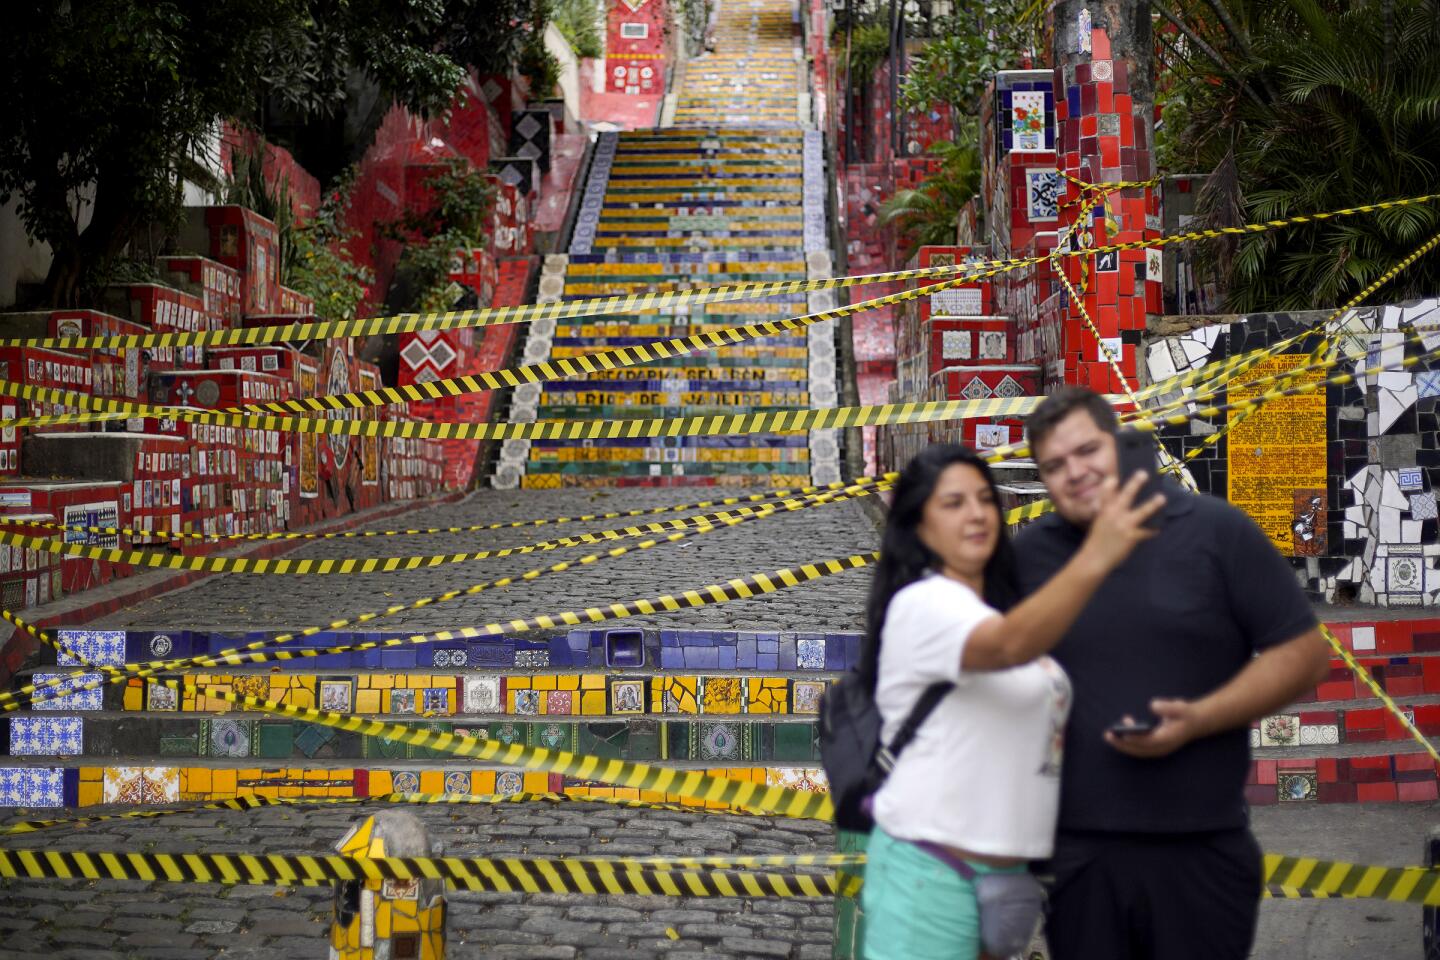 Brazil: Tourists pose for a photo in front of the sealed-off Selaron Steps during a lockdown aimed at stopping the spread of the coronavirus outbreak in Rio de Janeiro.